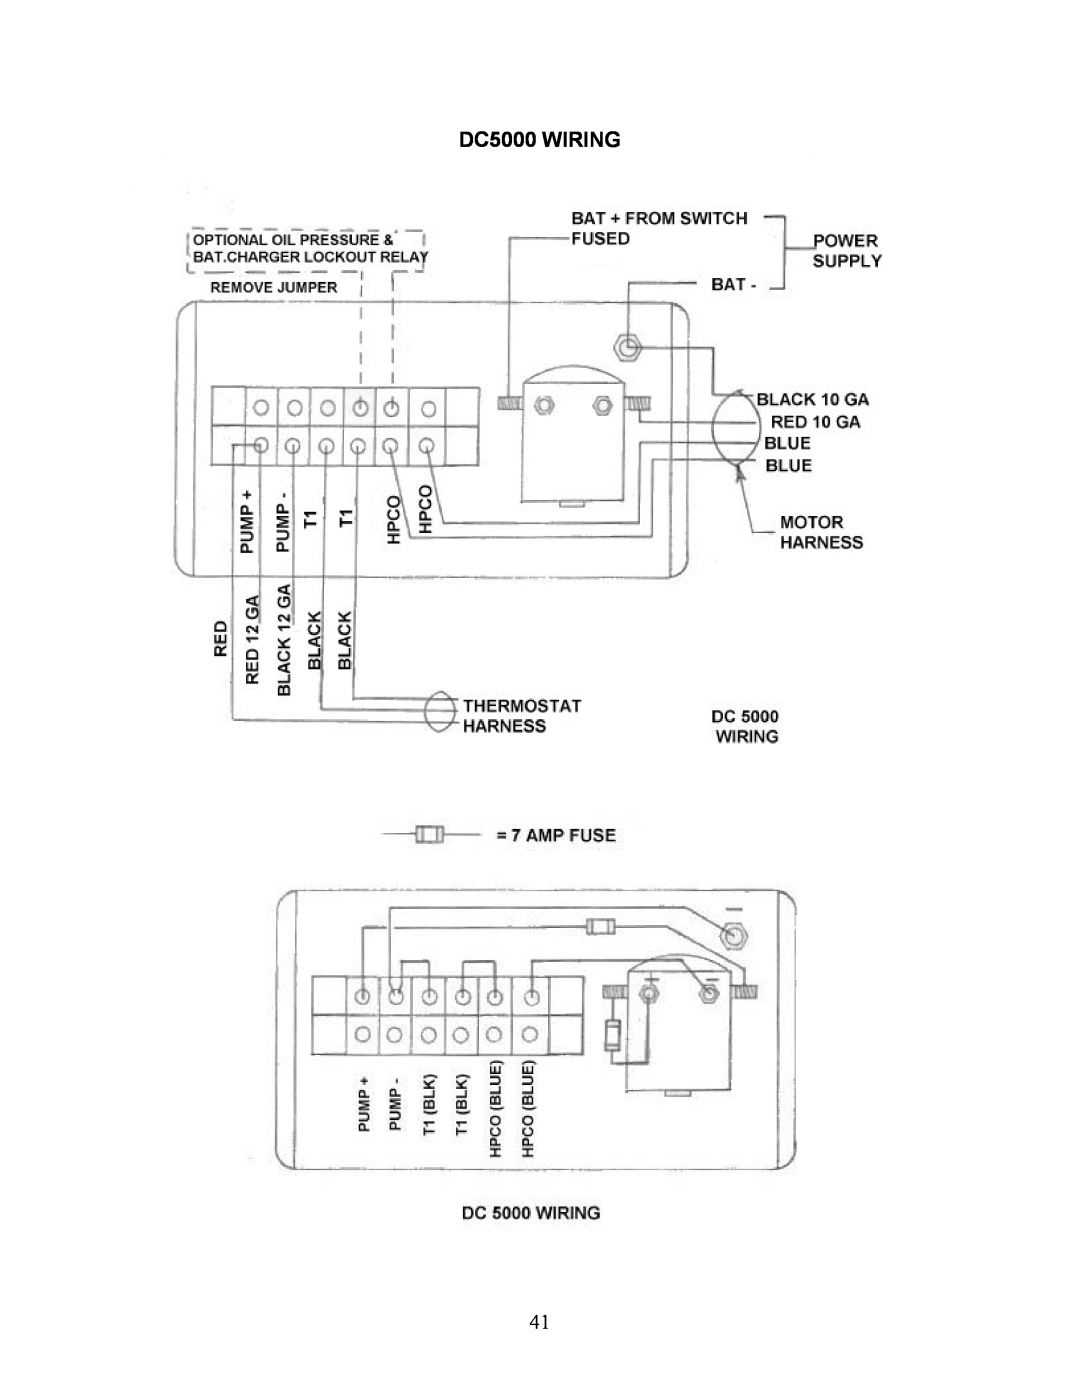 Sea Frost DC 5000 installation instructions DC5000 WIRING 